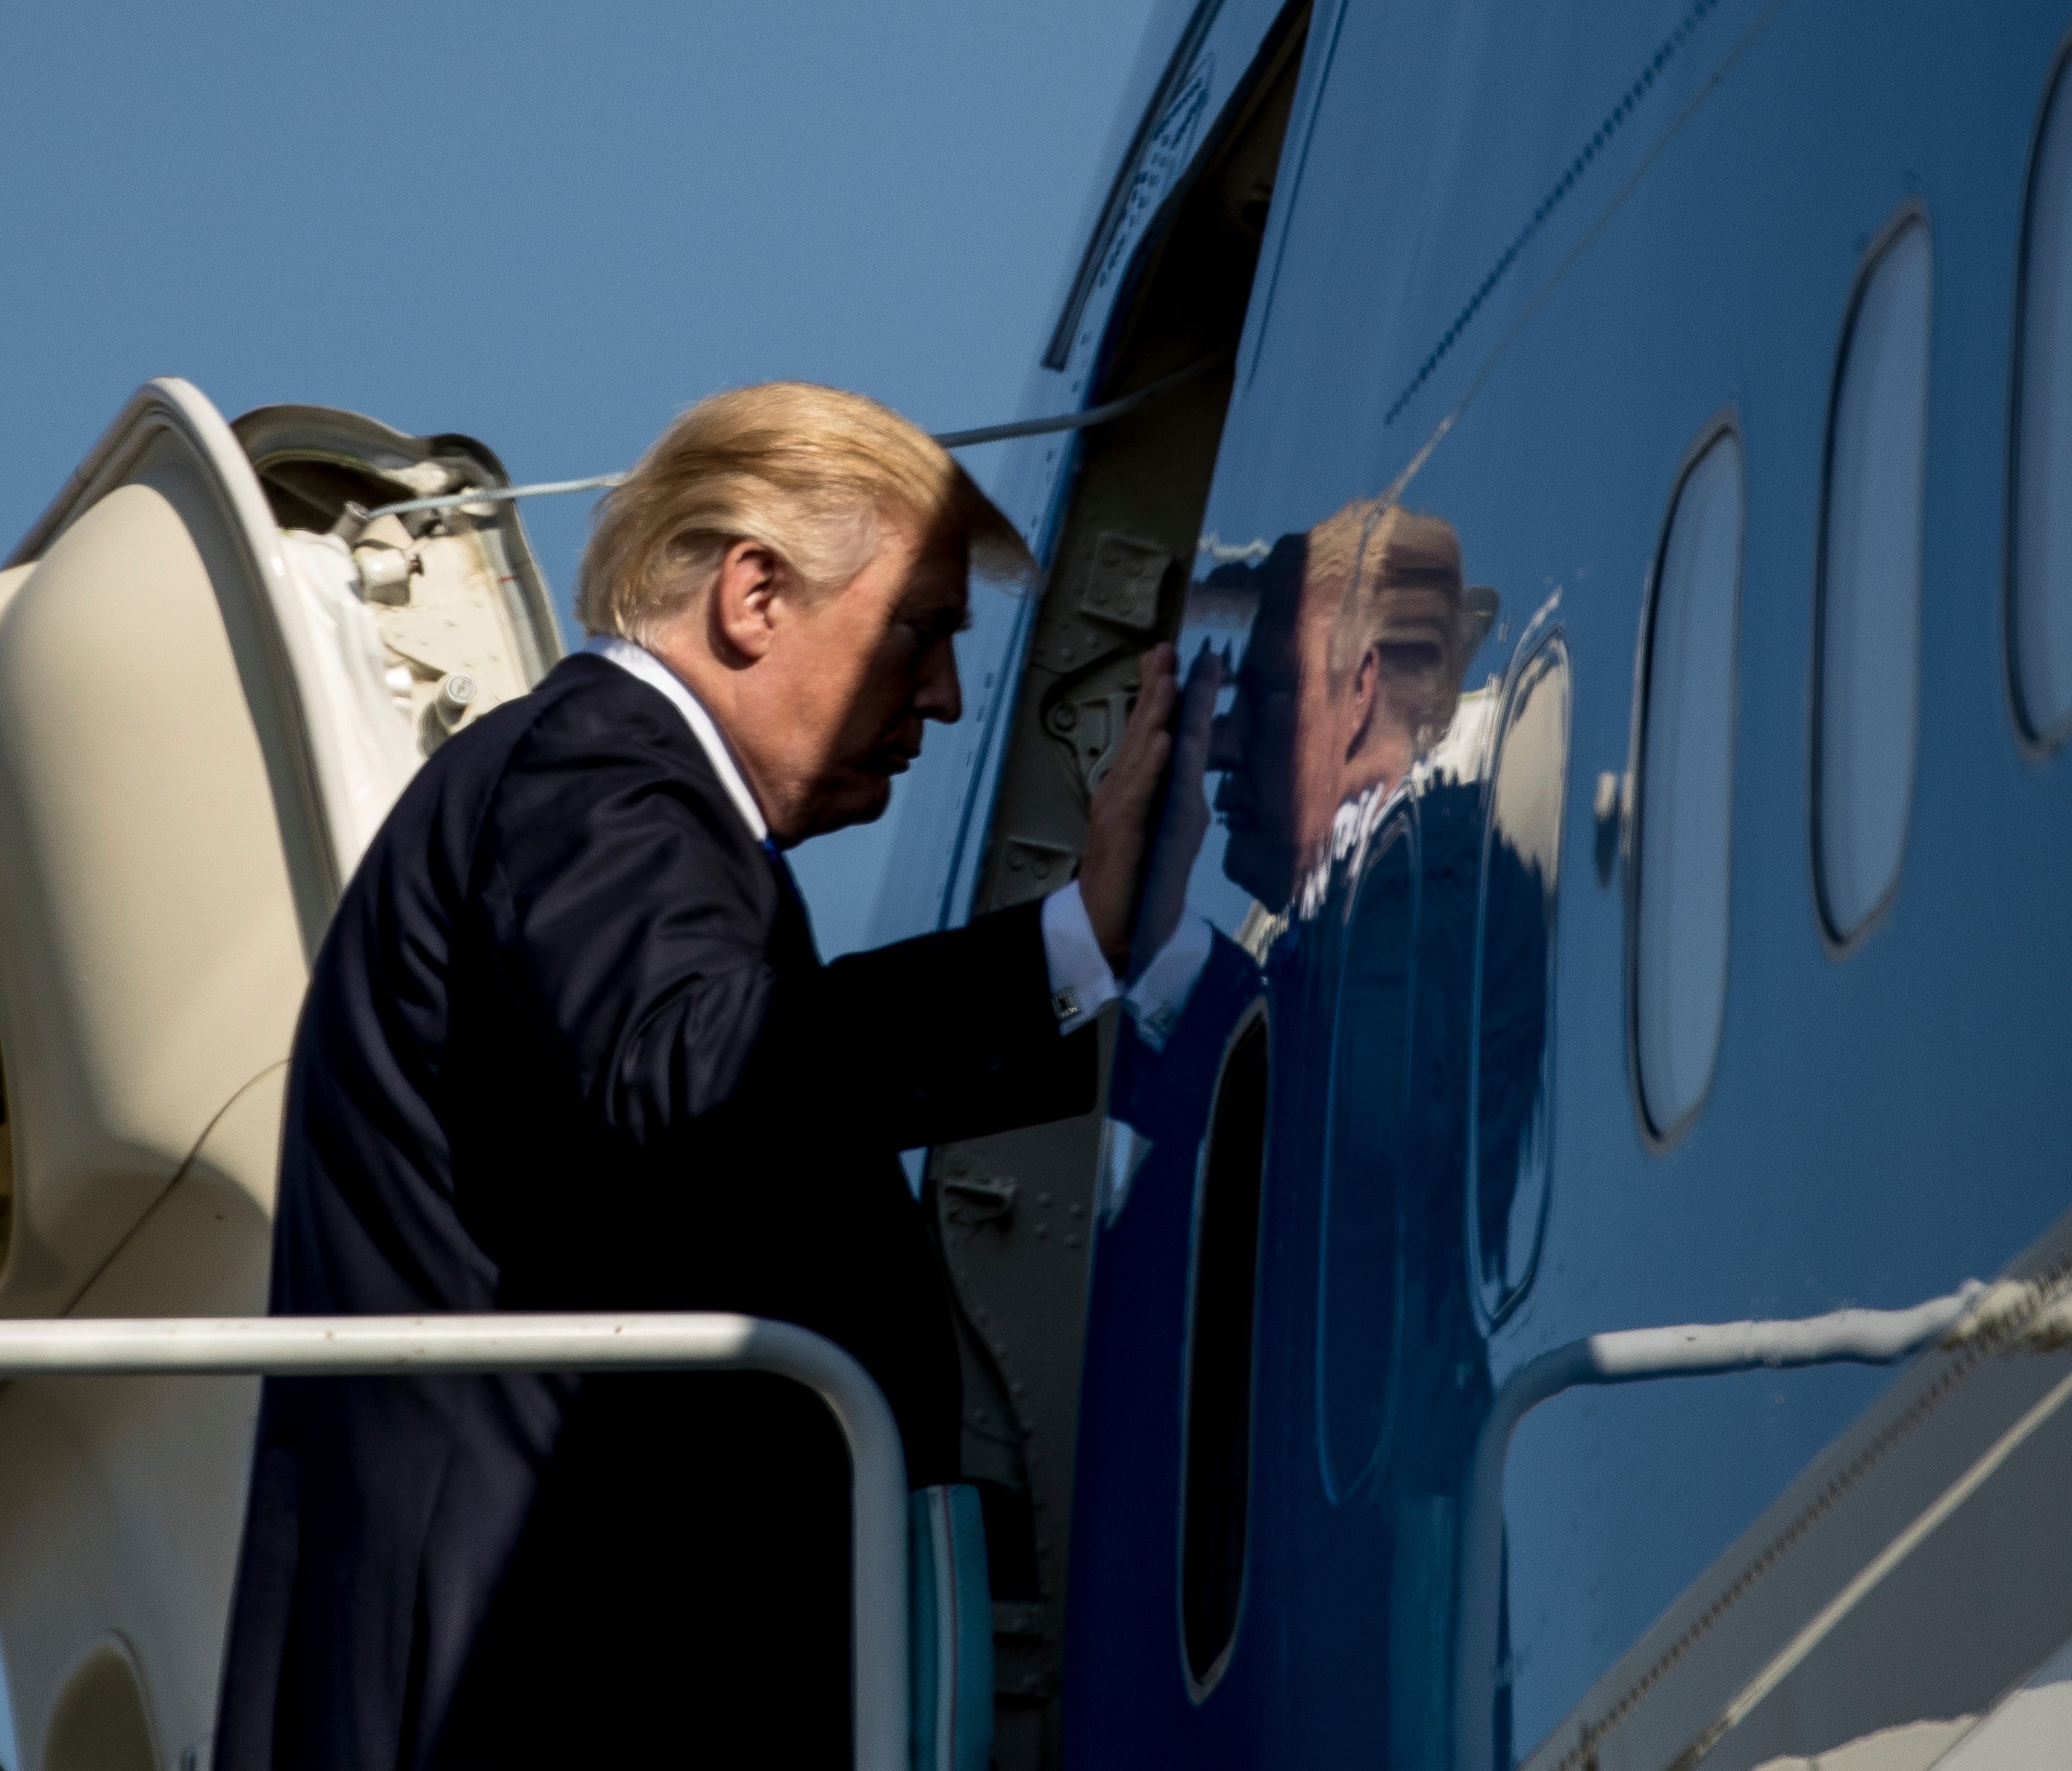 President Trump boards Air Force One in Japan.